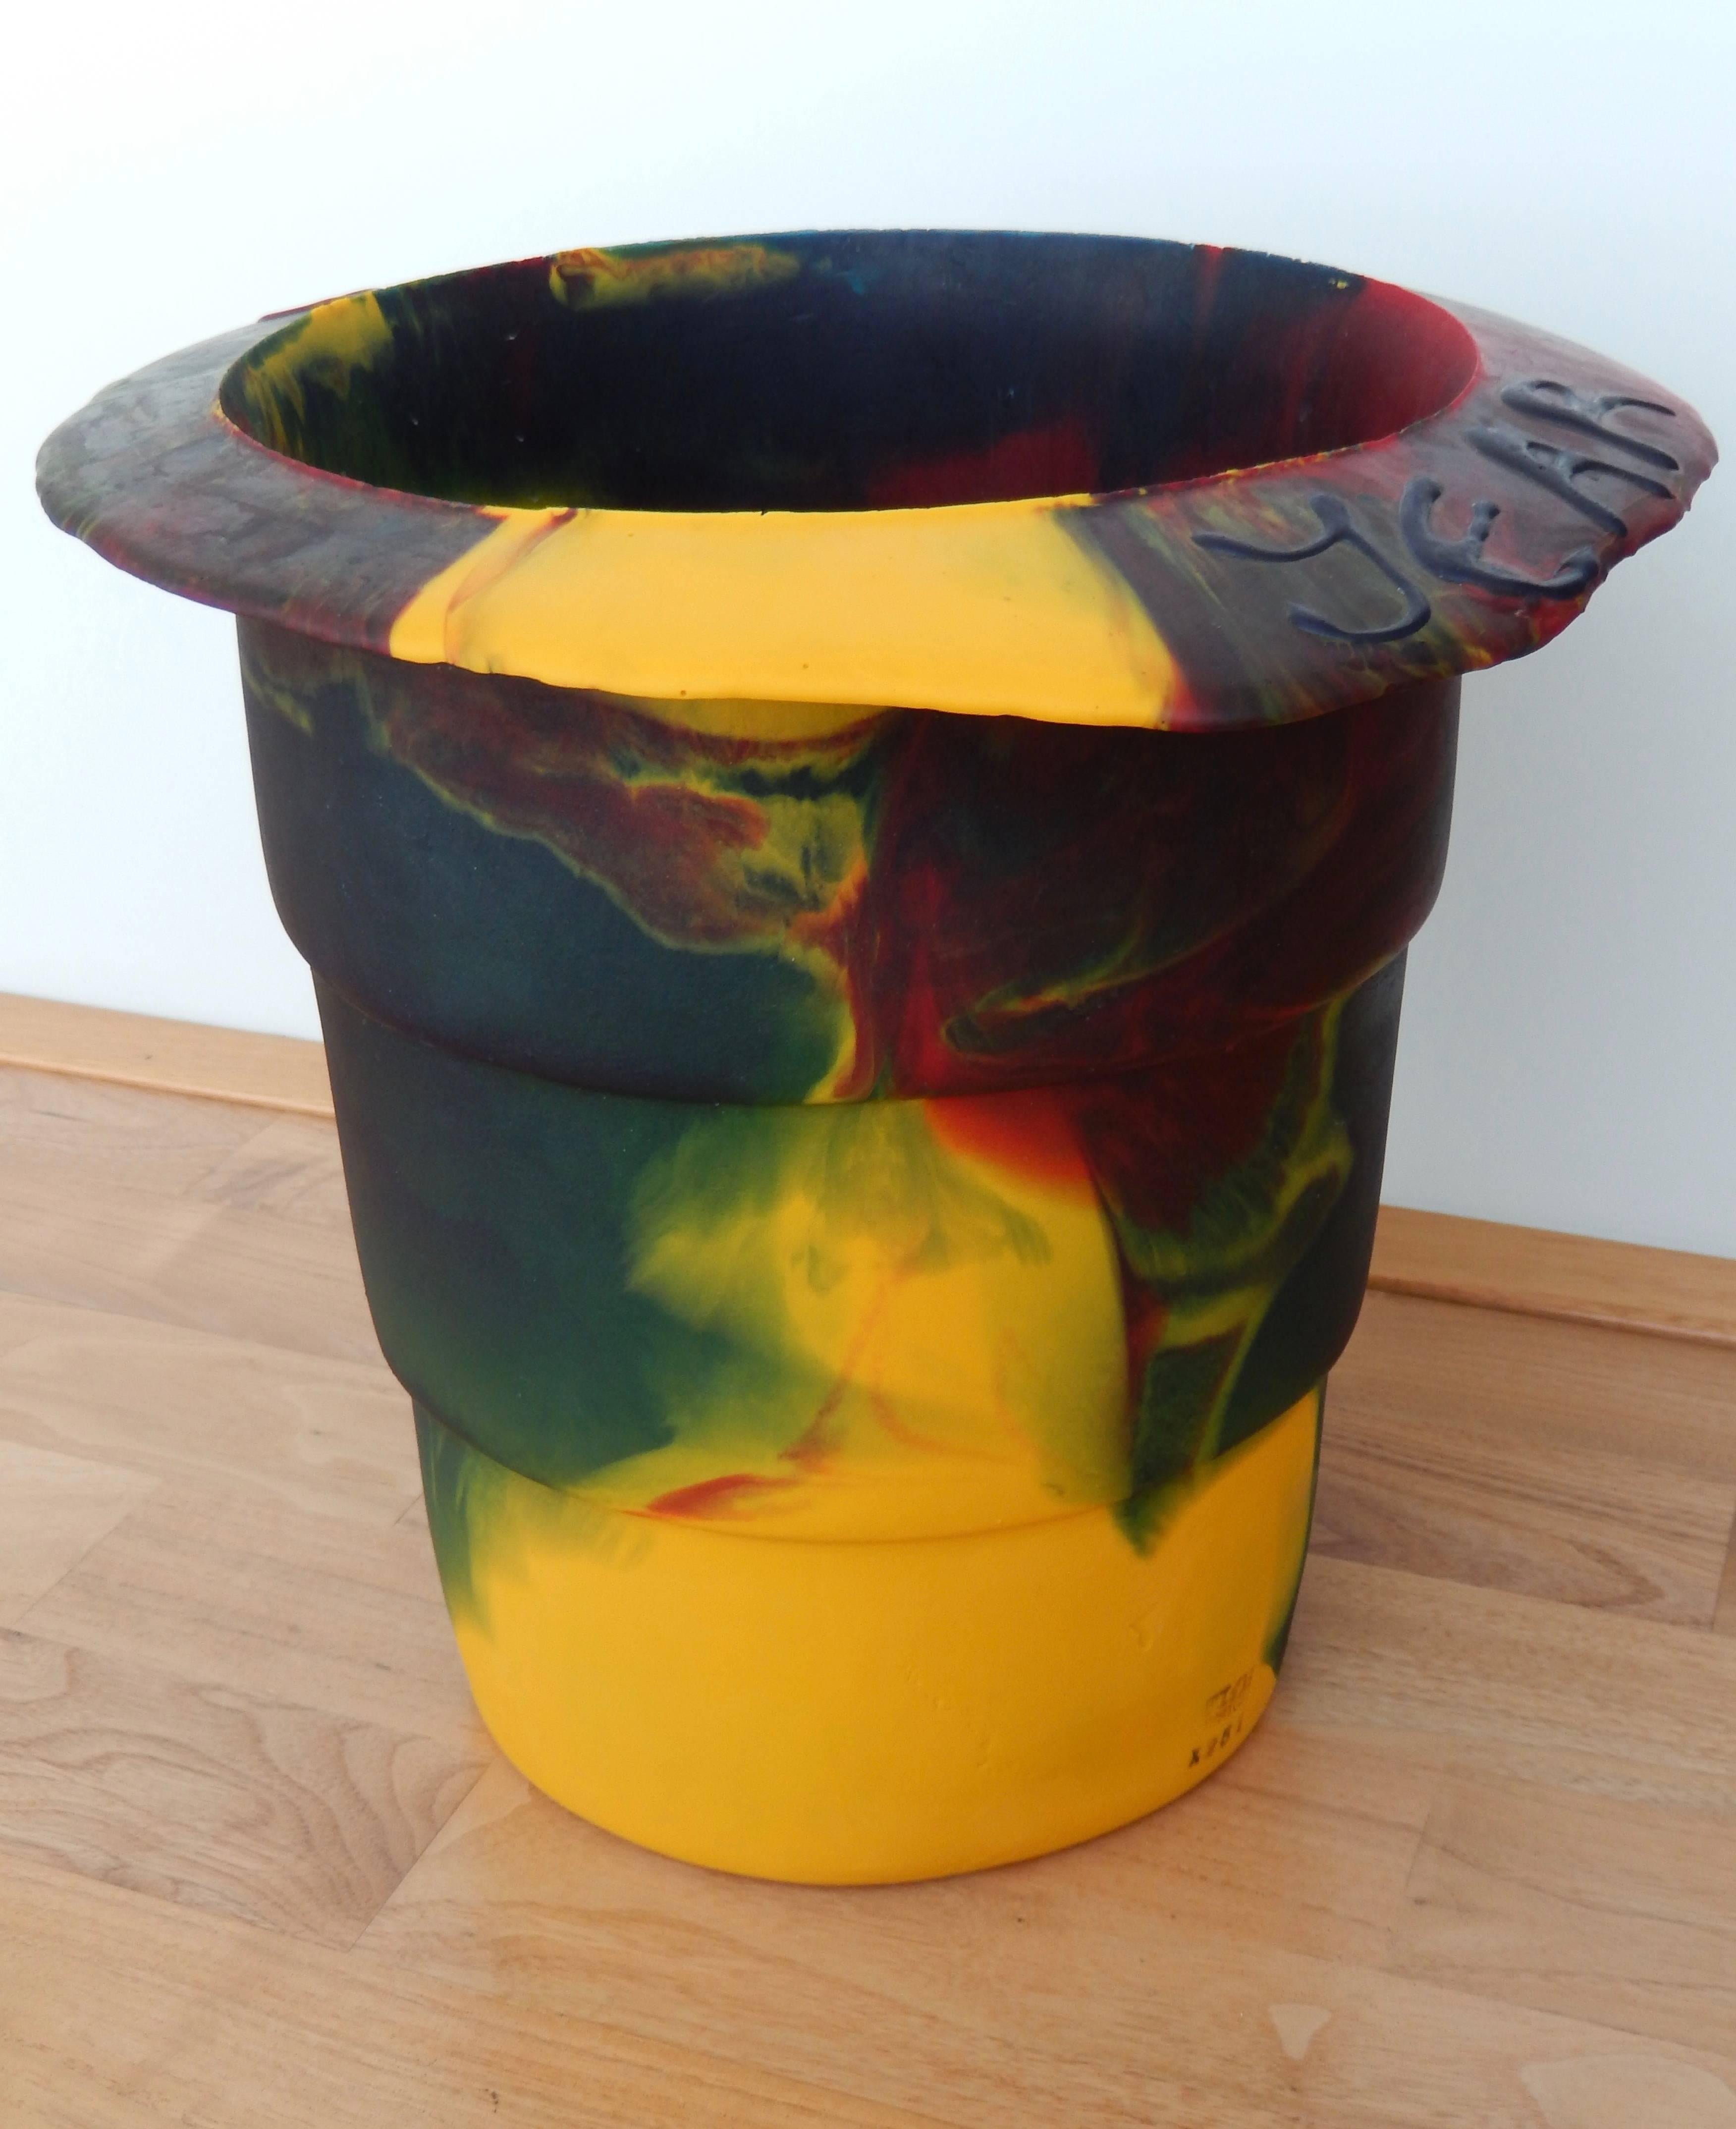 A multicolored resin bucket commemorating the Millennium by the avant-garde Italian architect Gaetano Pesce (b. 1939). Pesce has cleverly incorporated 